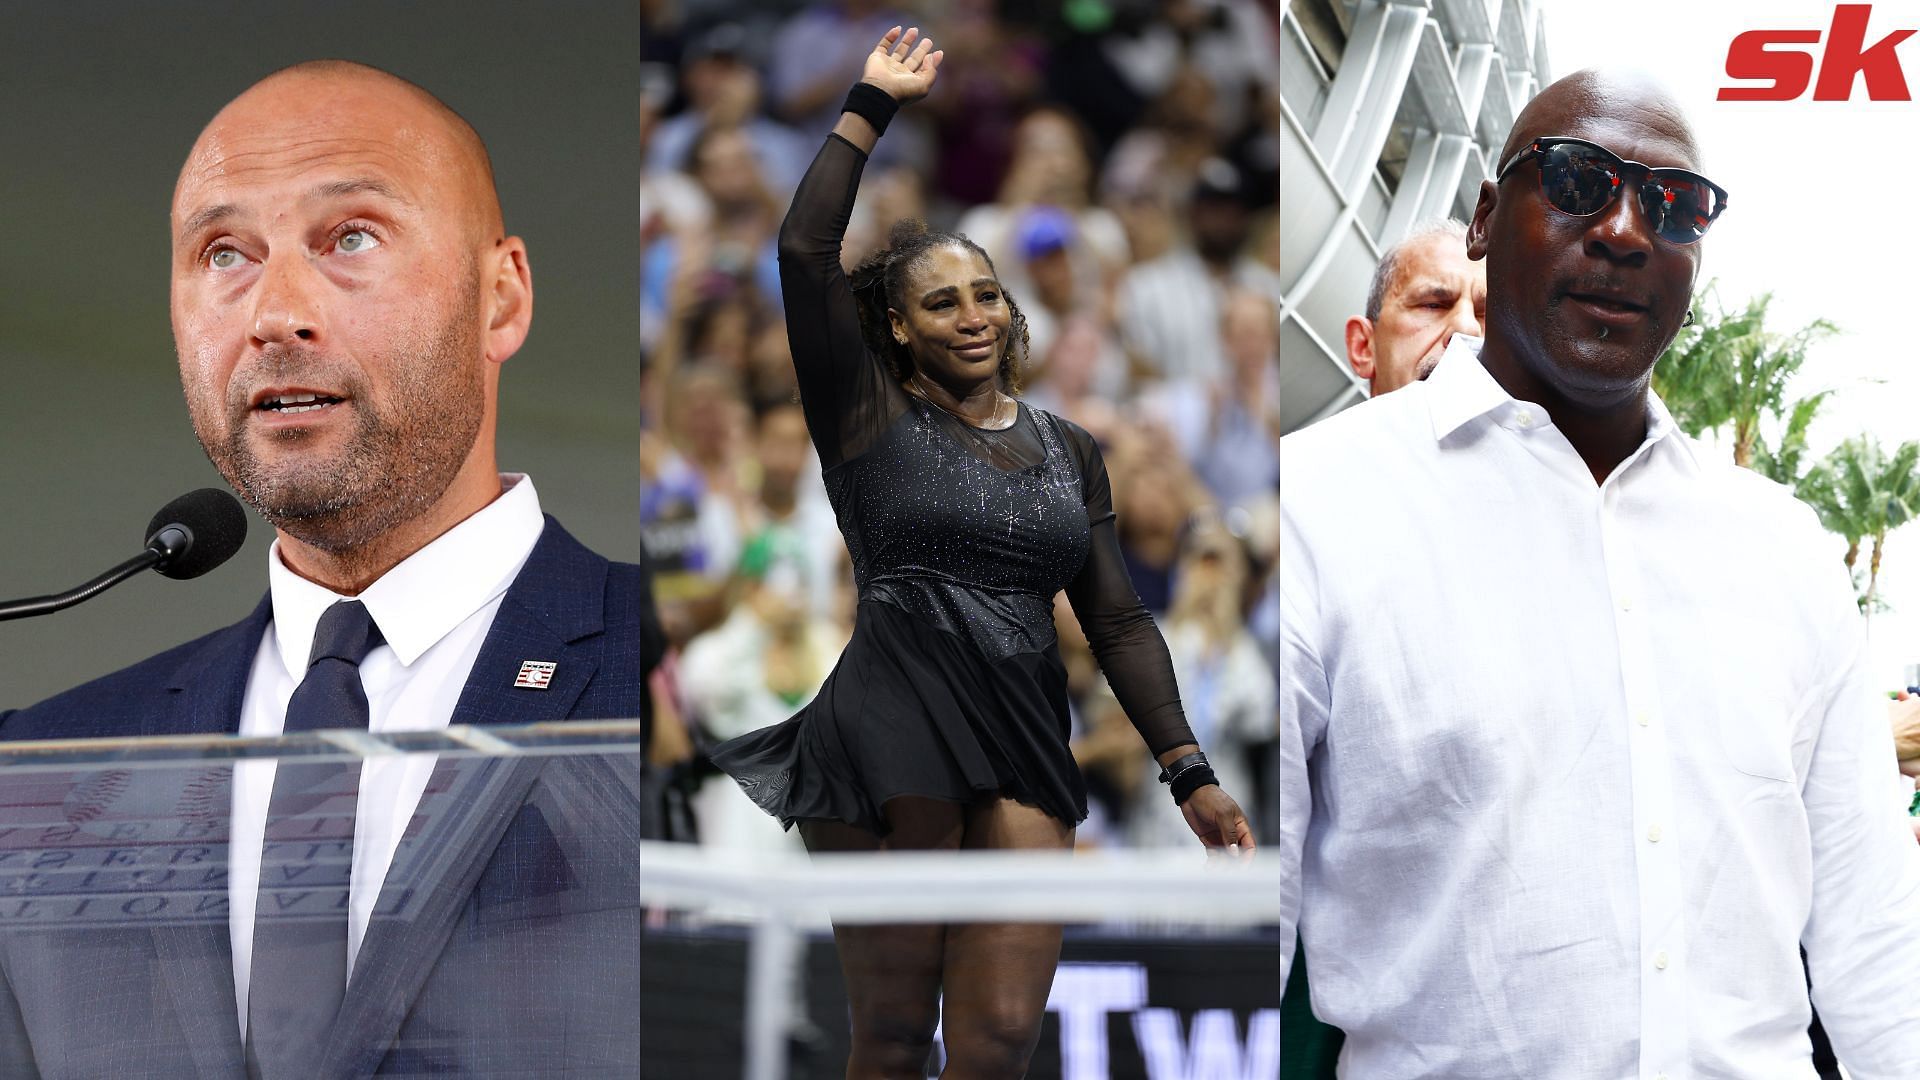 When MLB legend Derek Jeter accurately predicted his retirement in an  interview alongside Michael Jordan and Serena Williams